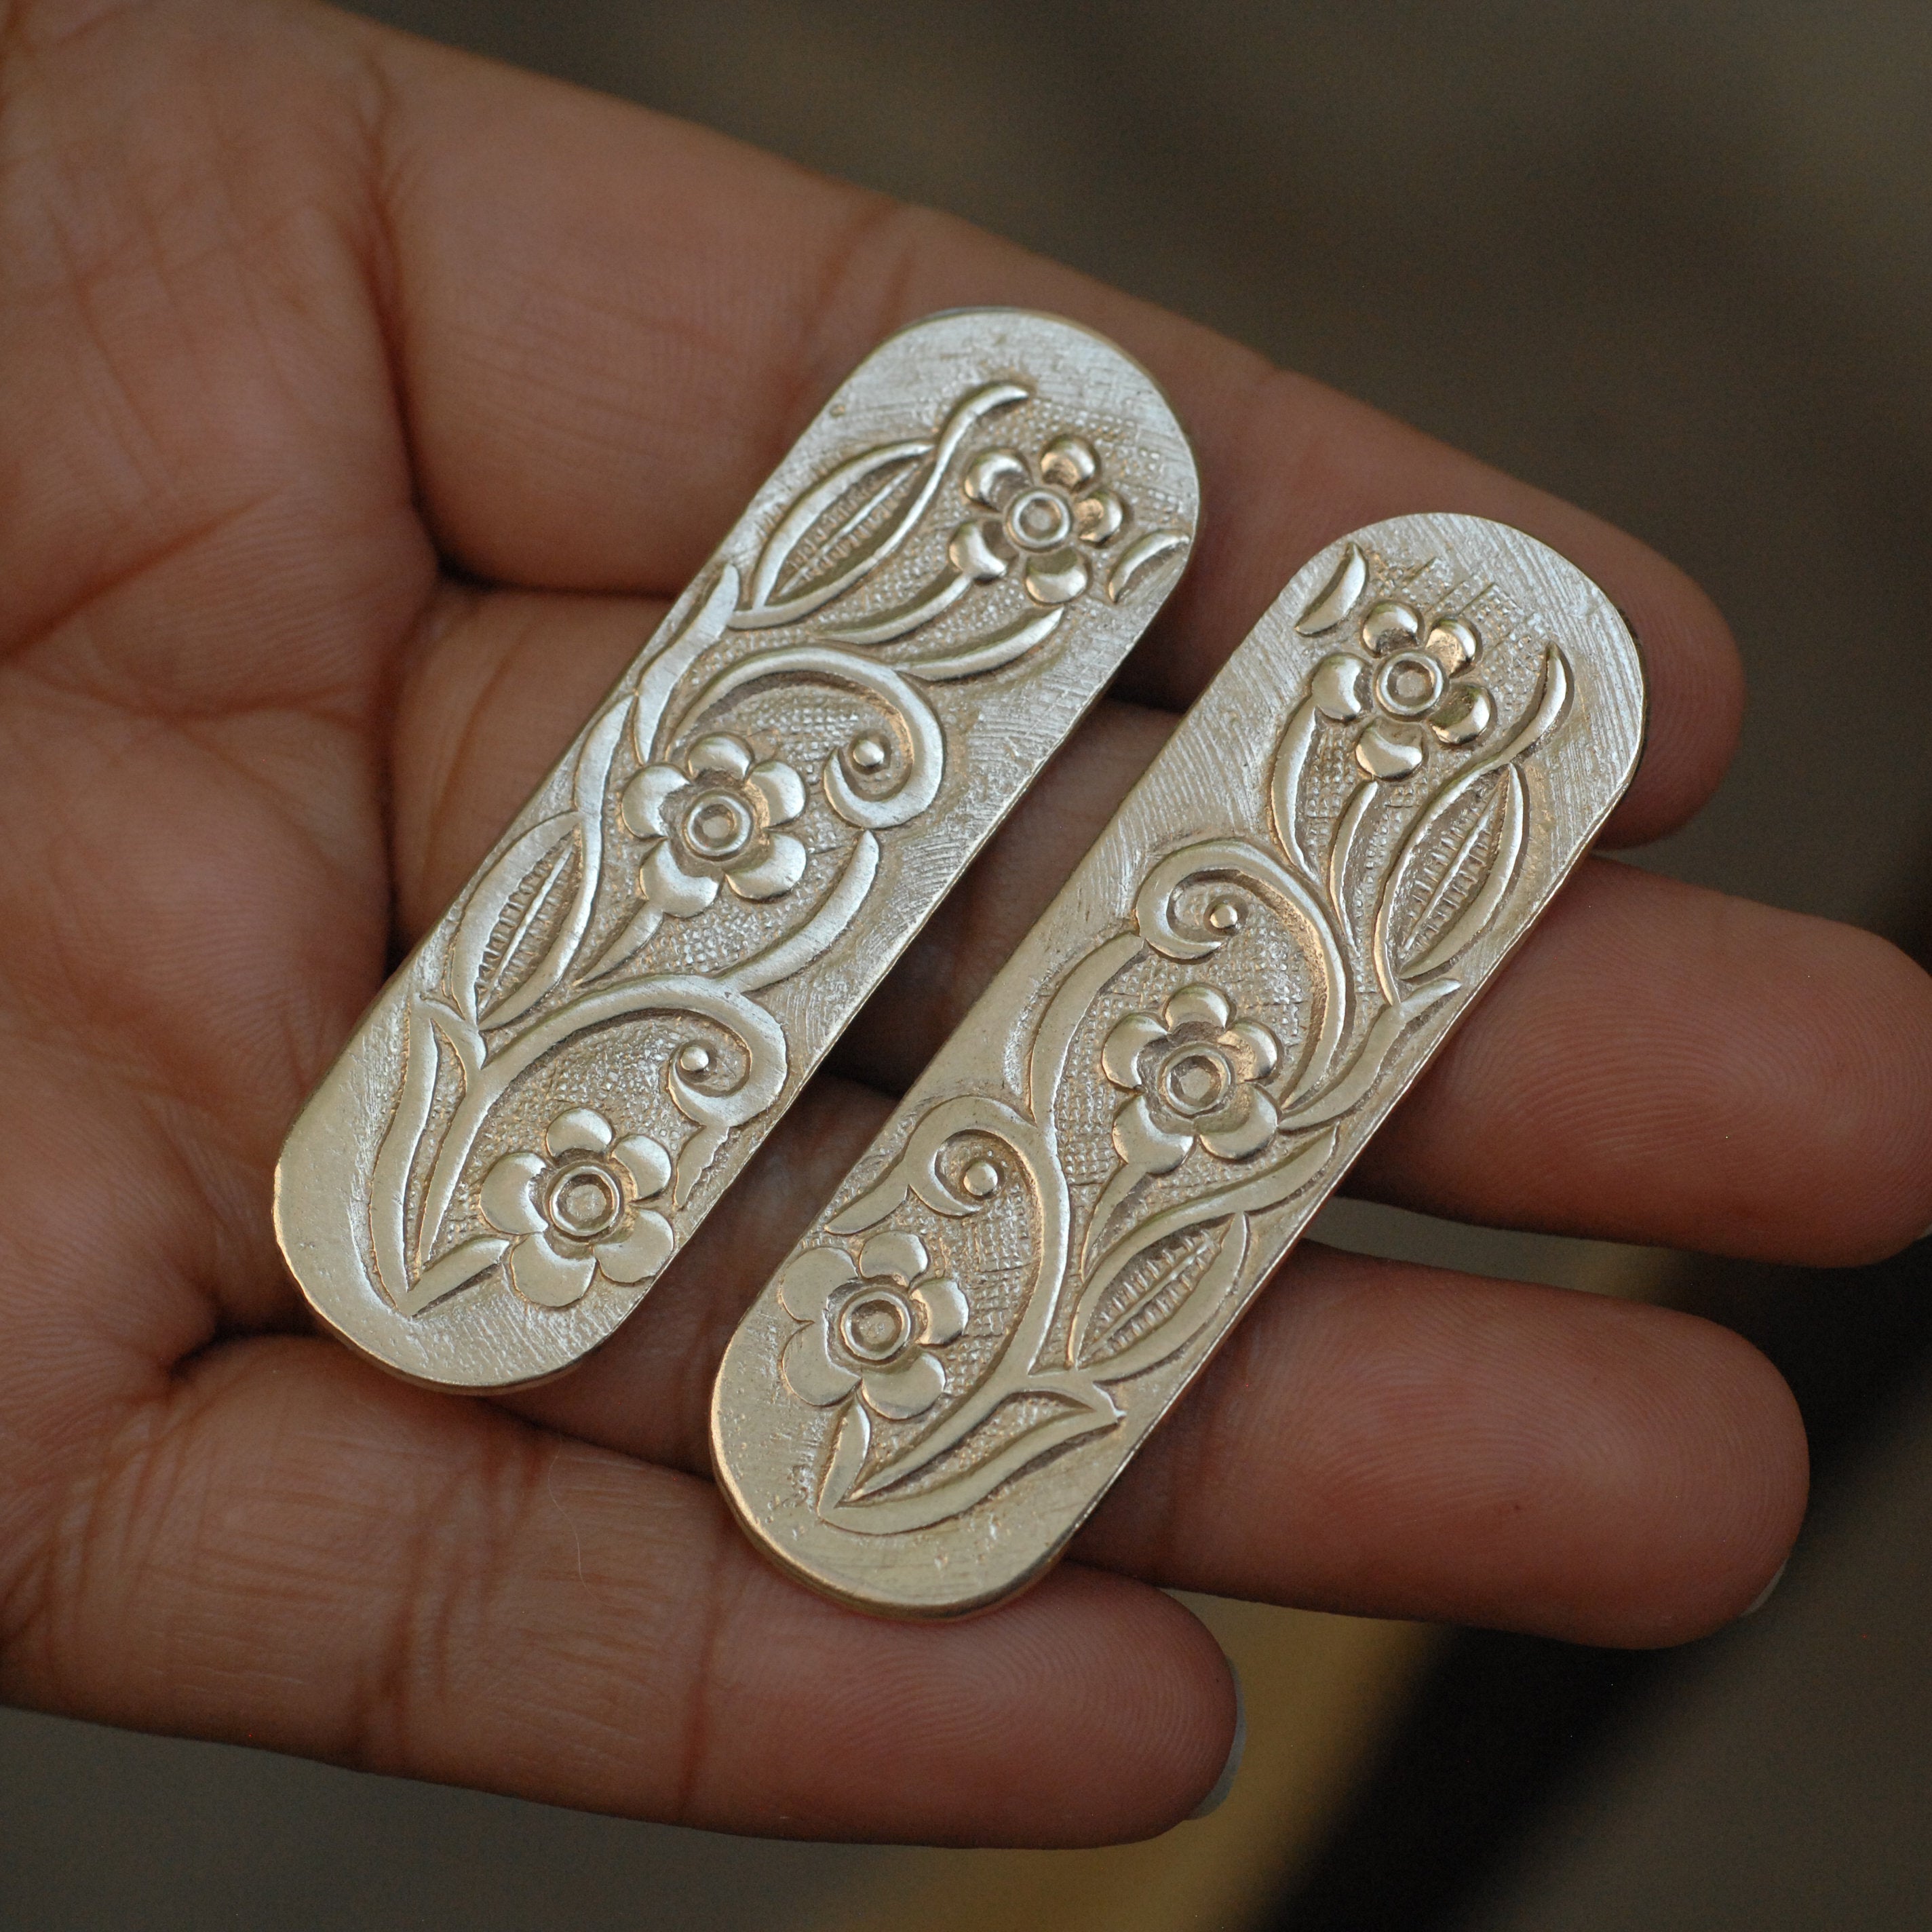 Freeform Oval shapes w/ floral texture metal blanks - Nickel silver